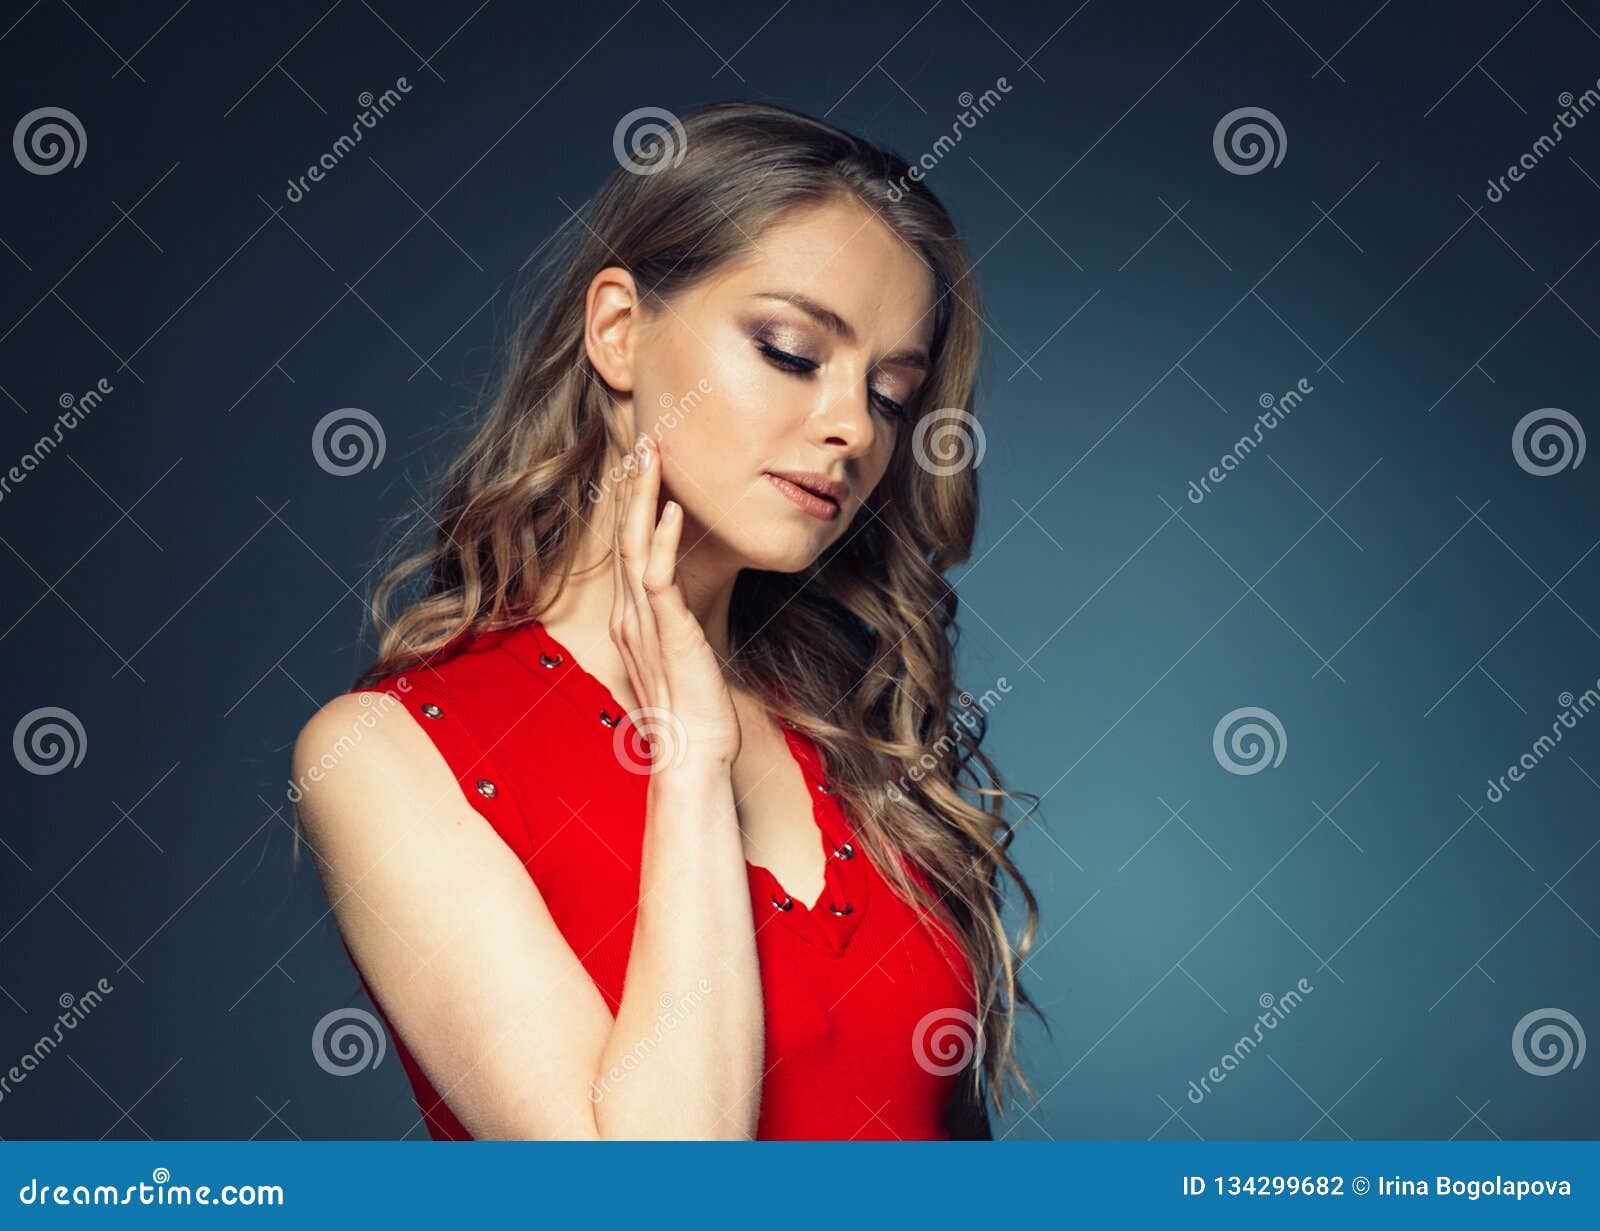 Woman in Red Dress with Long Blonde Hair Stock Photo - Image of hair ...